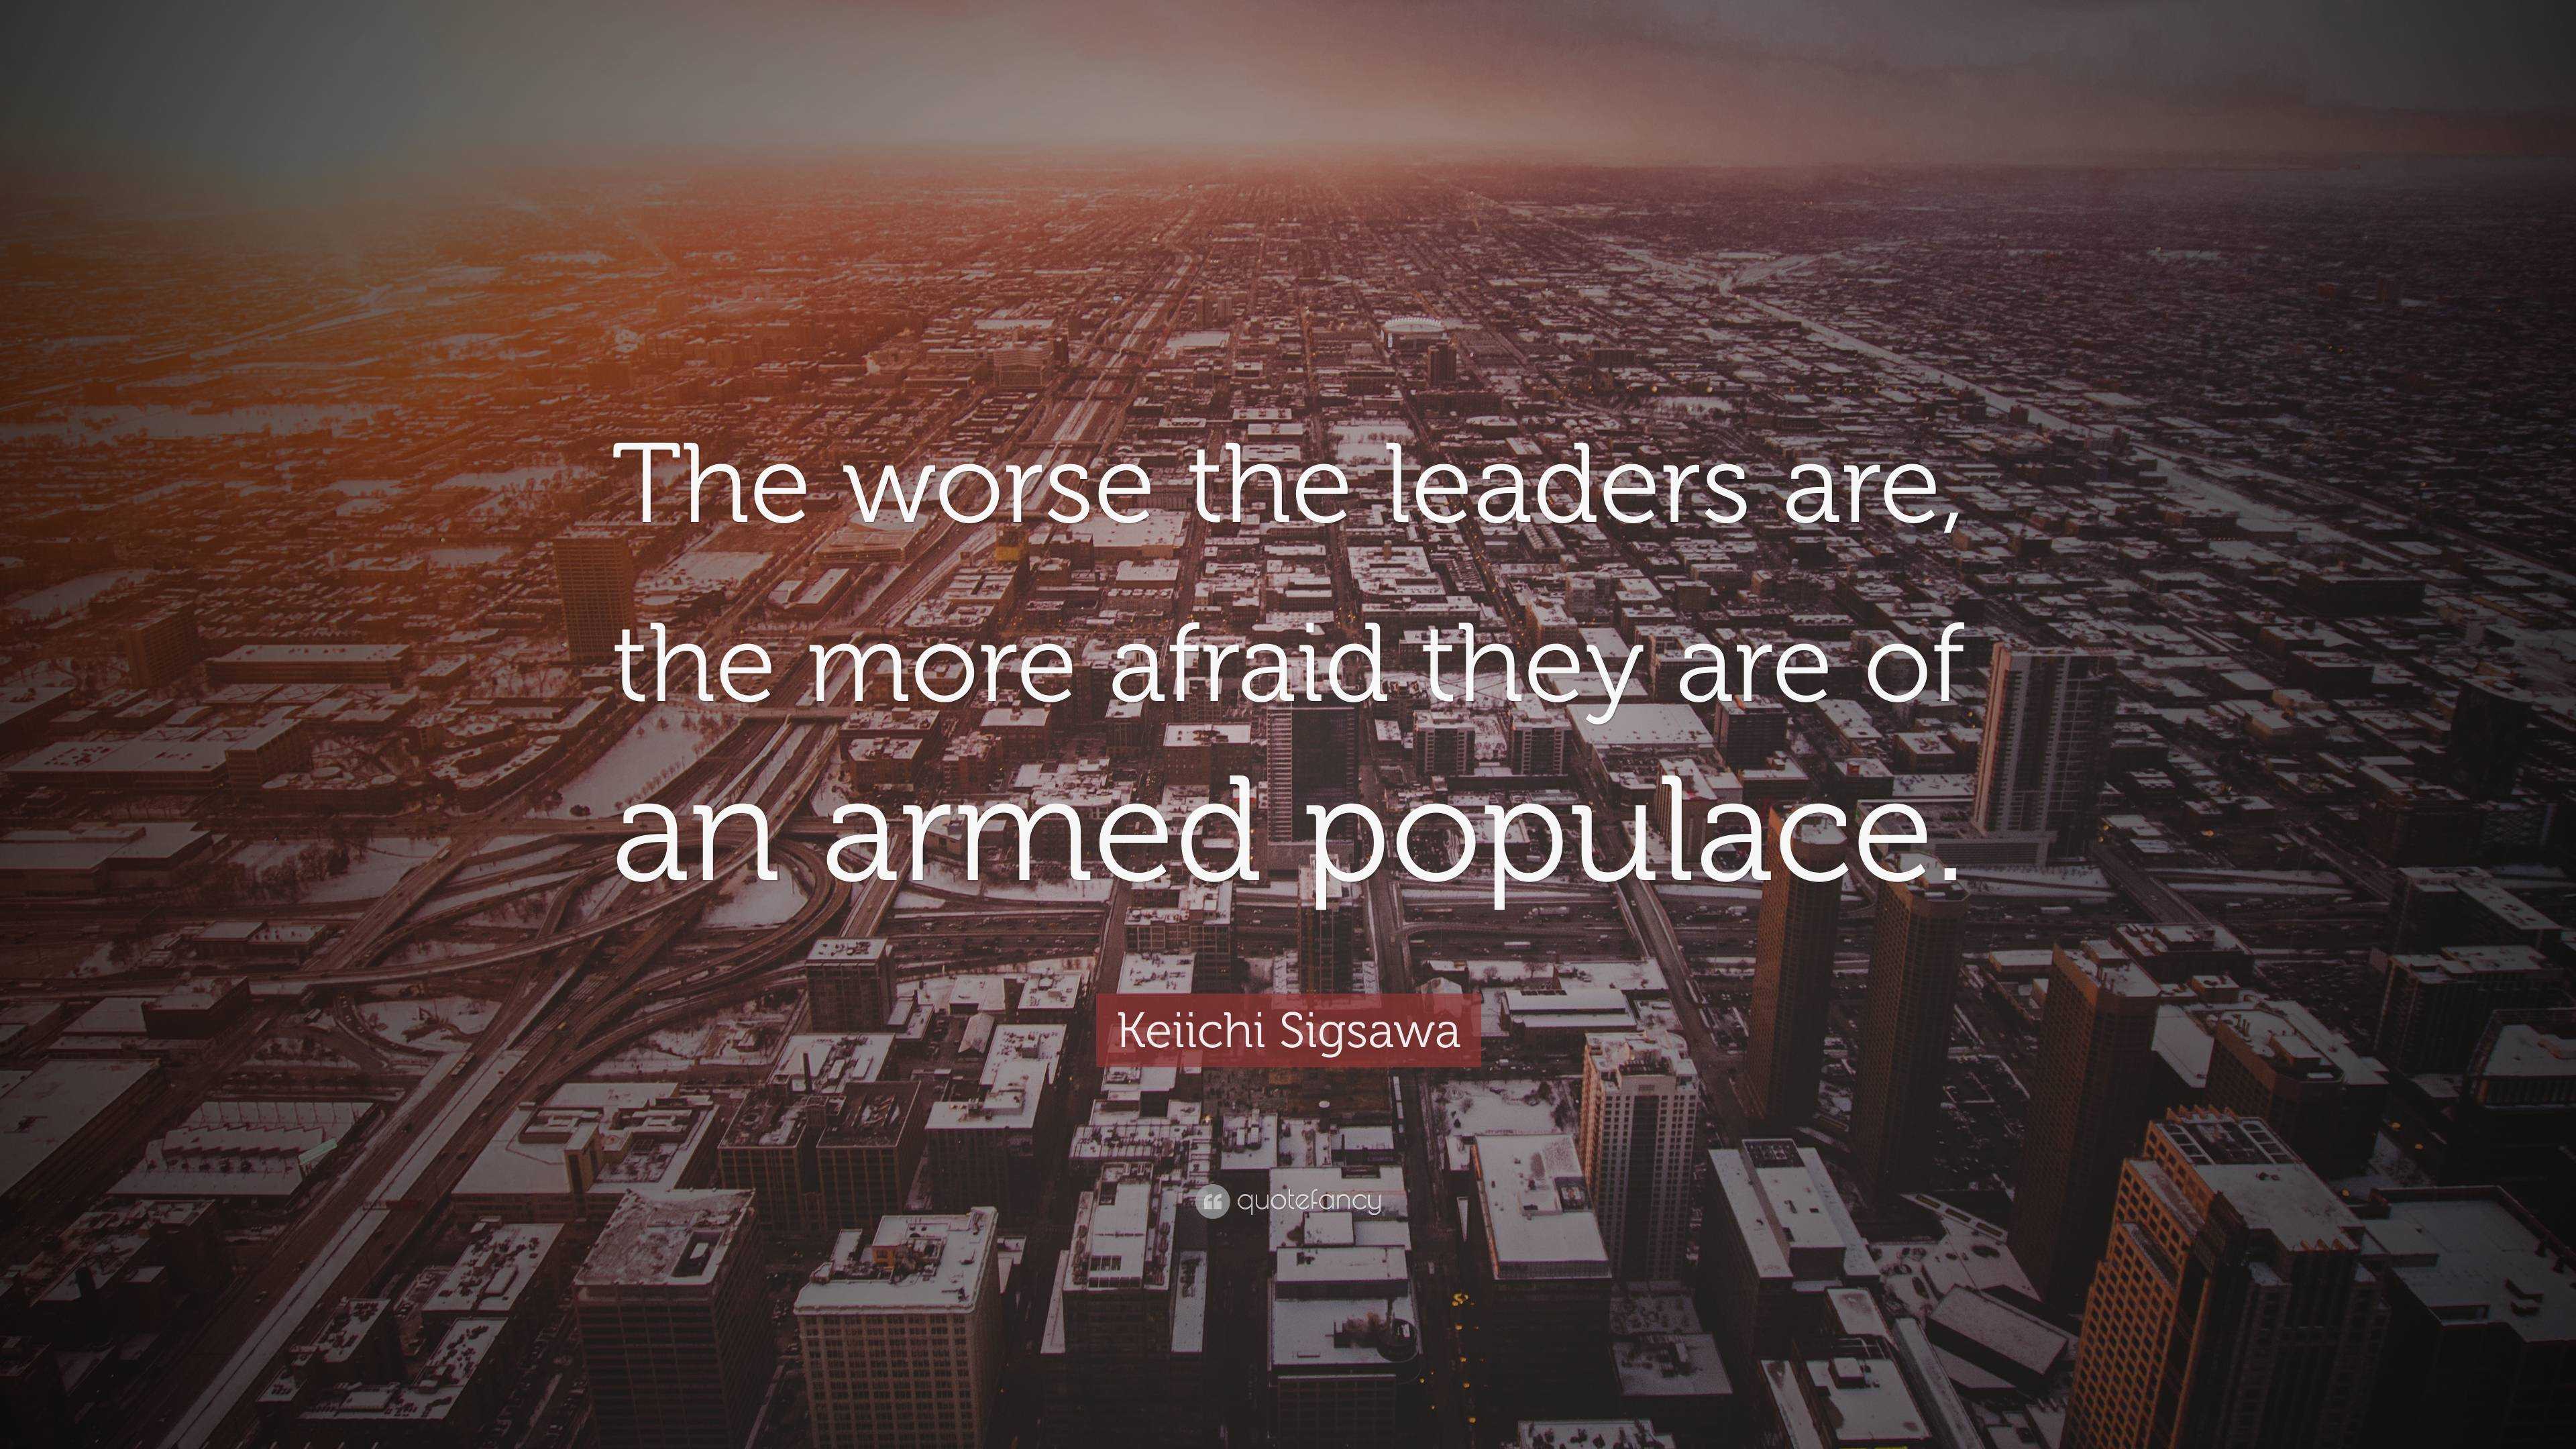 Keiichi Sigsawa Quote: “The worse the leaders are, the more afraid they ...